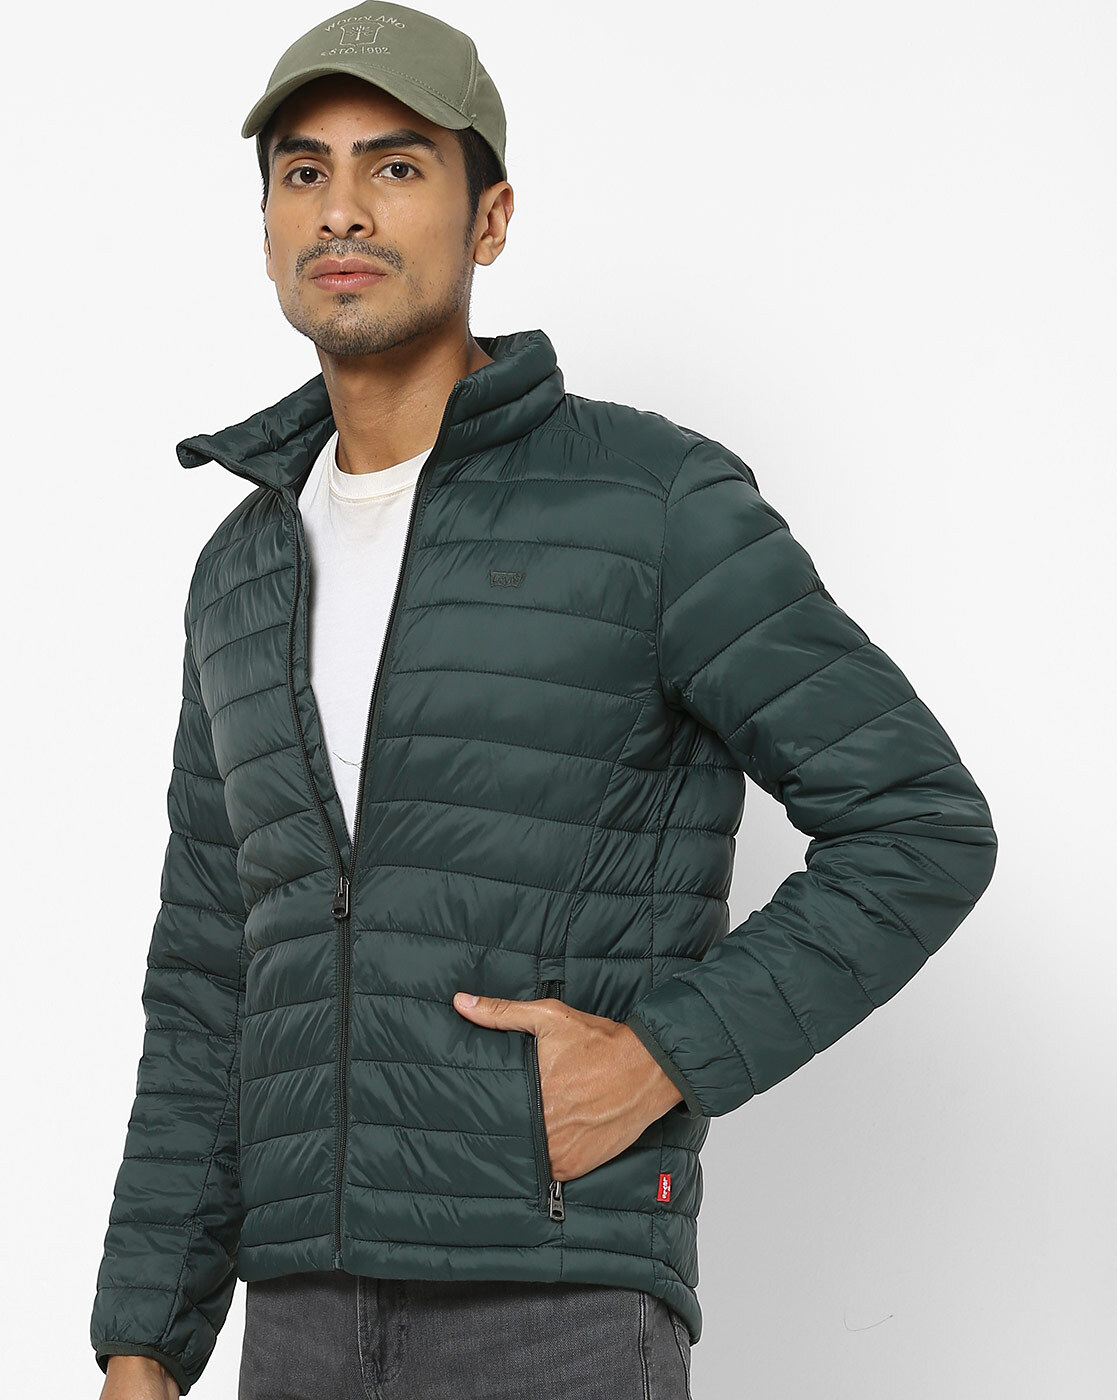 levi's quilted jacket